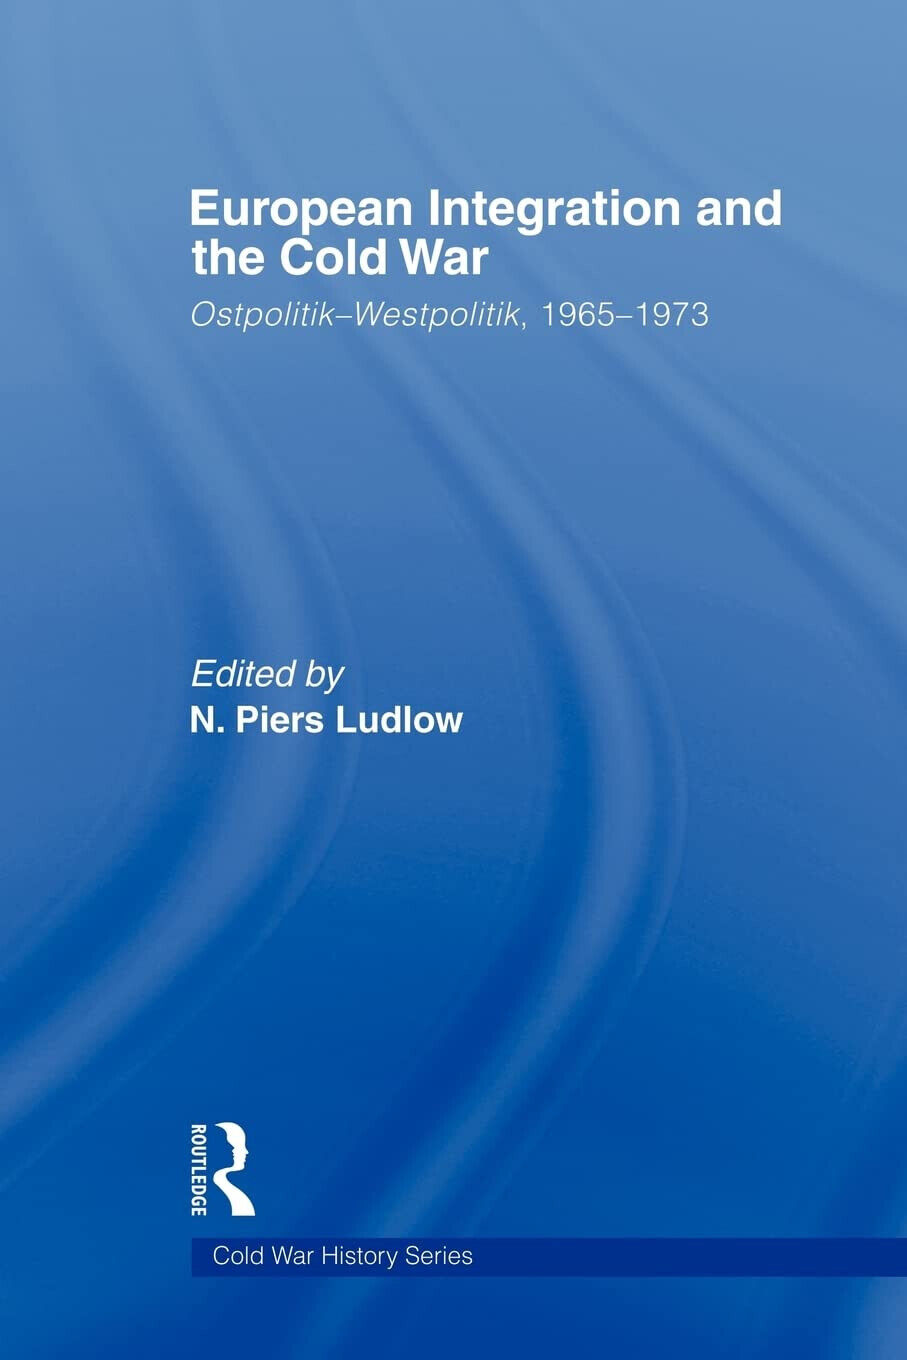 European Integration and the Cold War - N. Piers Ludlow - Routledge, 2009